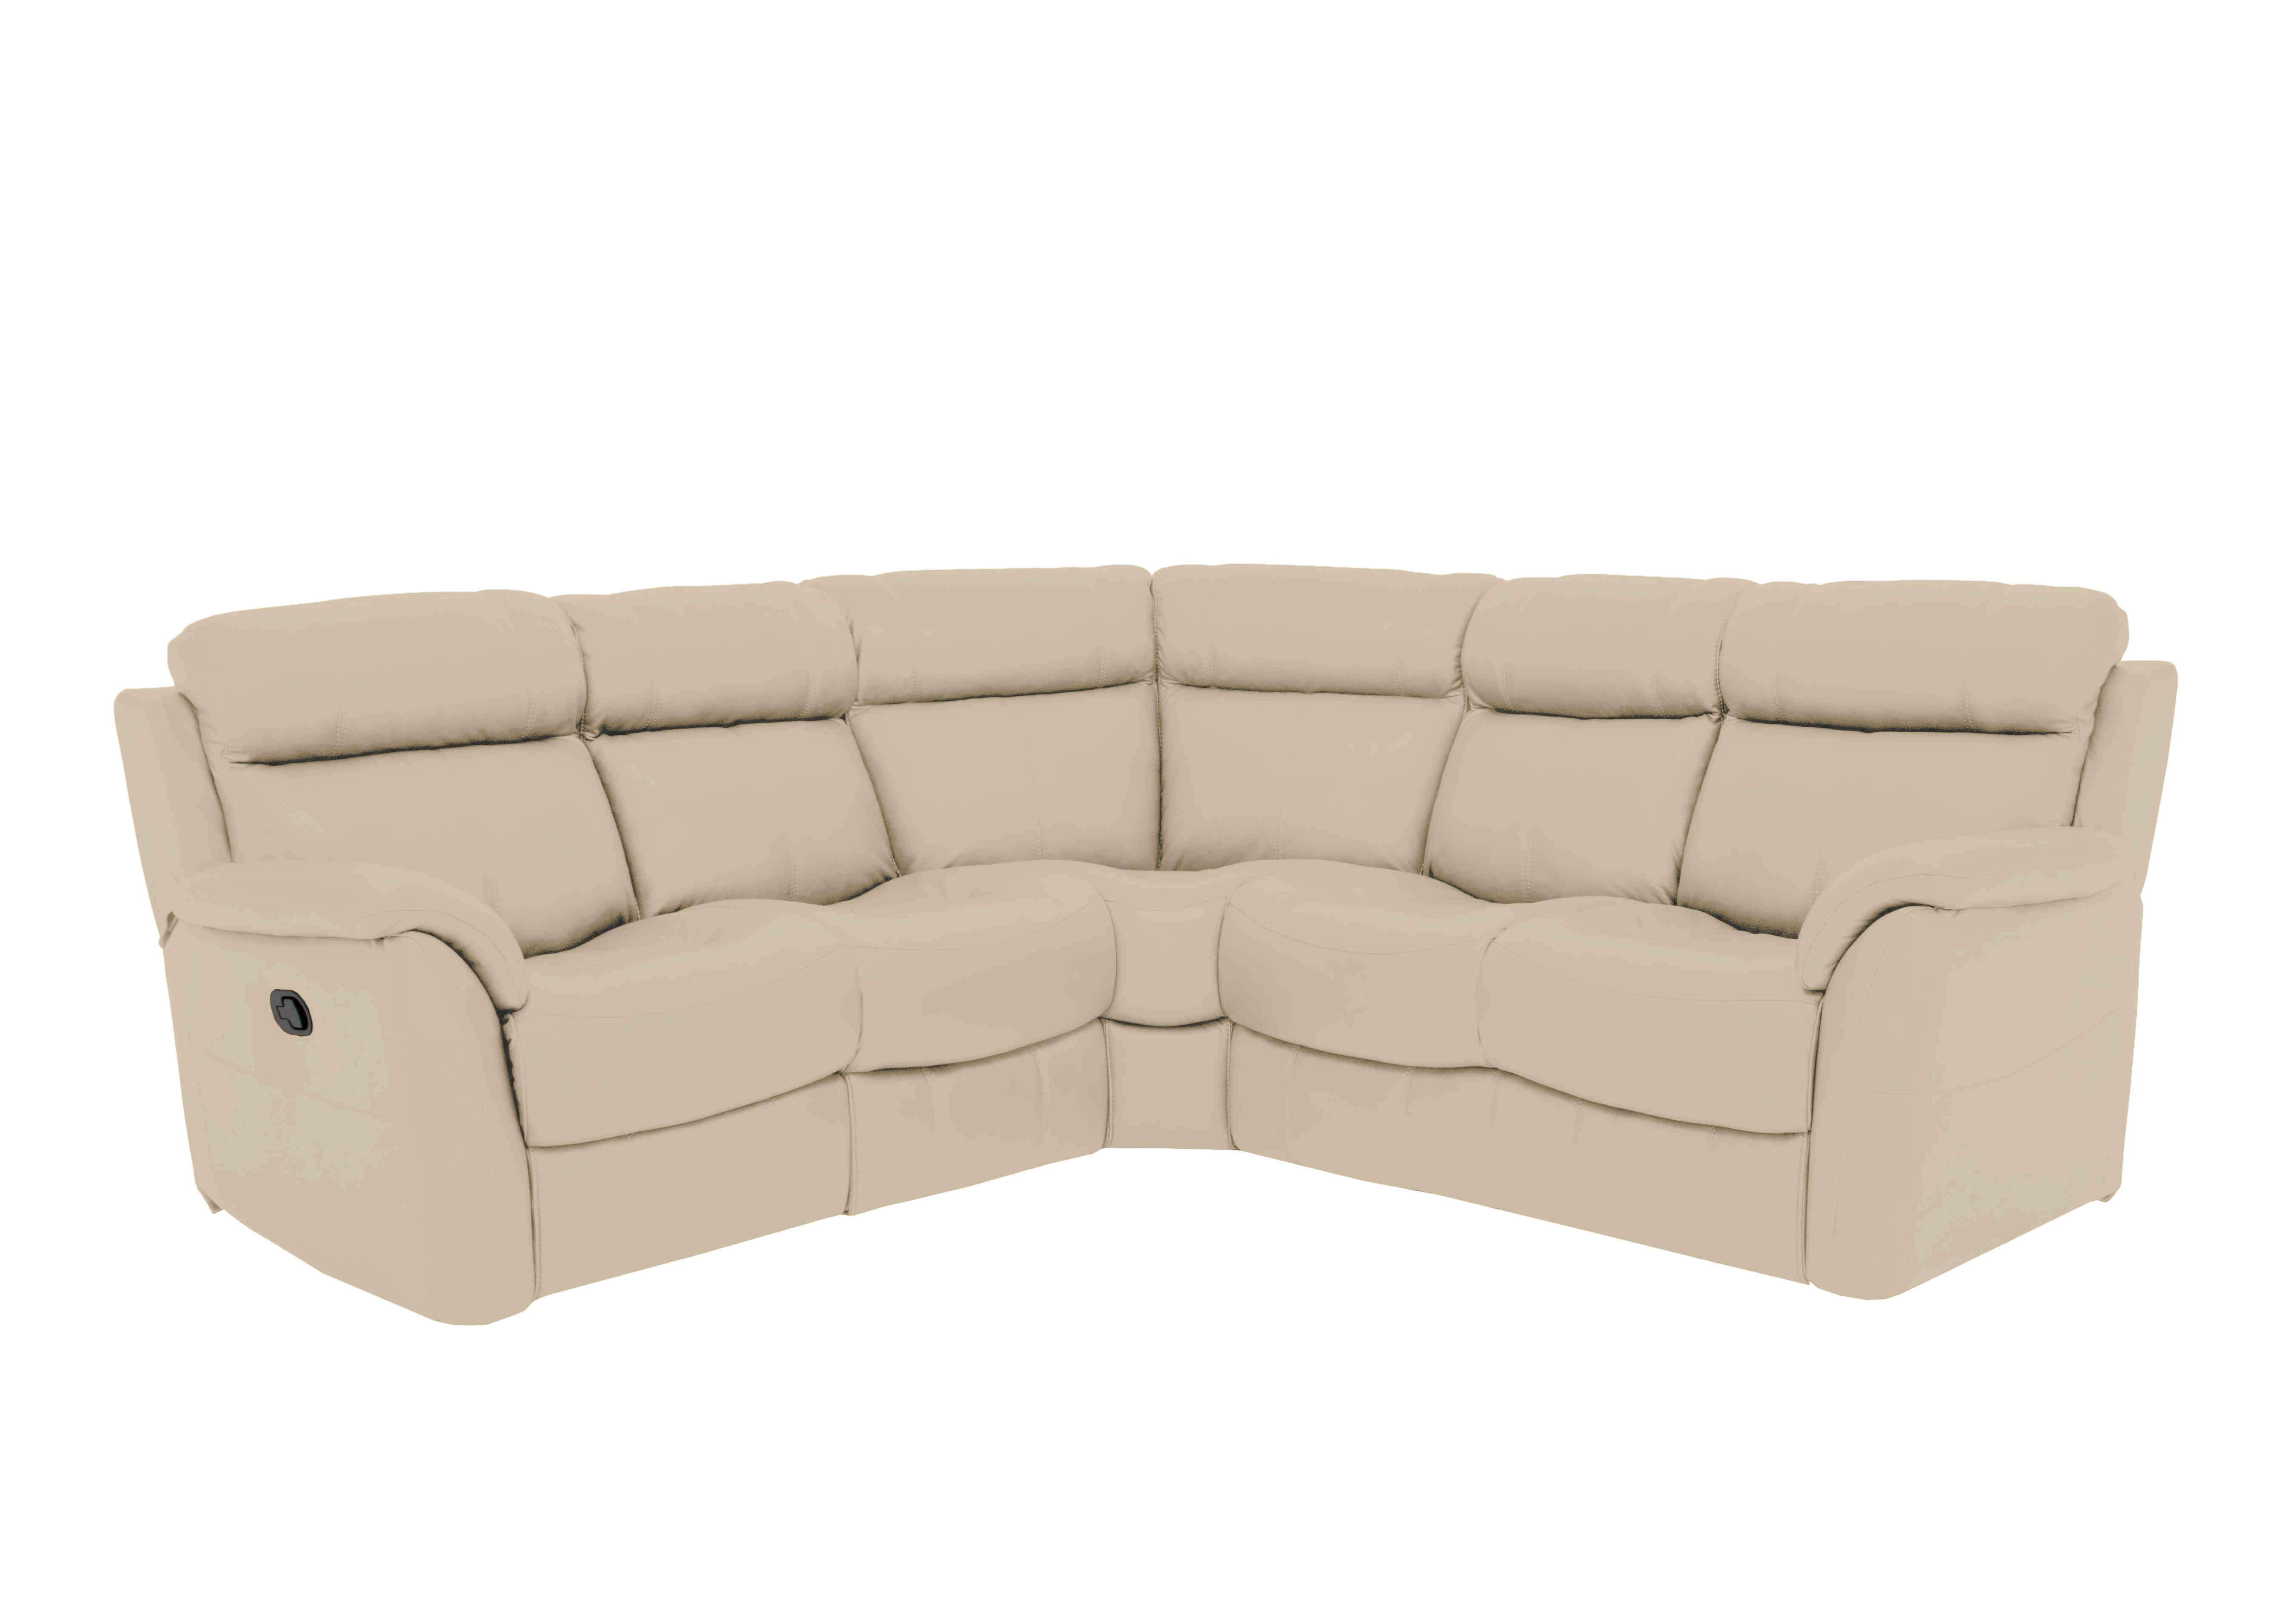 Relax Station Revive Leather Corner Sofa in Bv-862c Bisque on Furniture Village